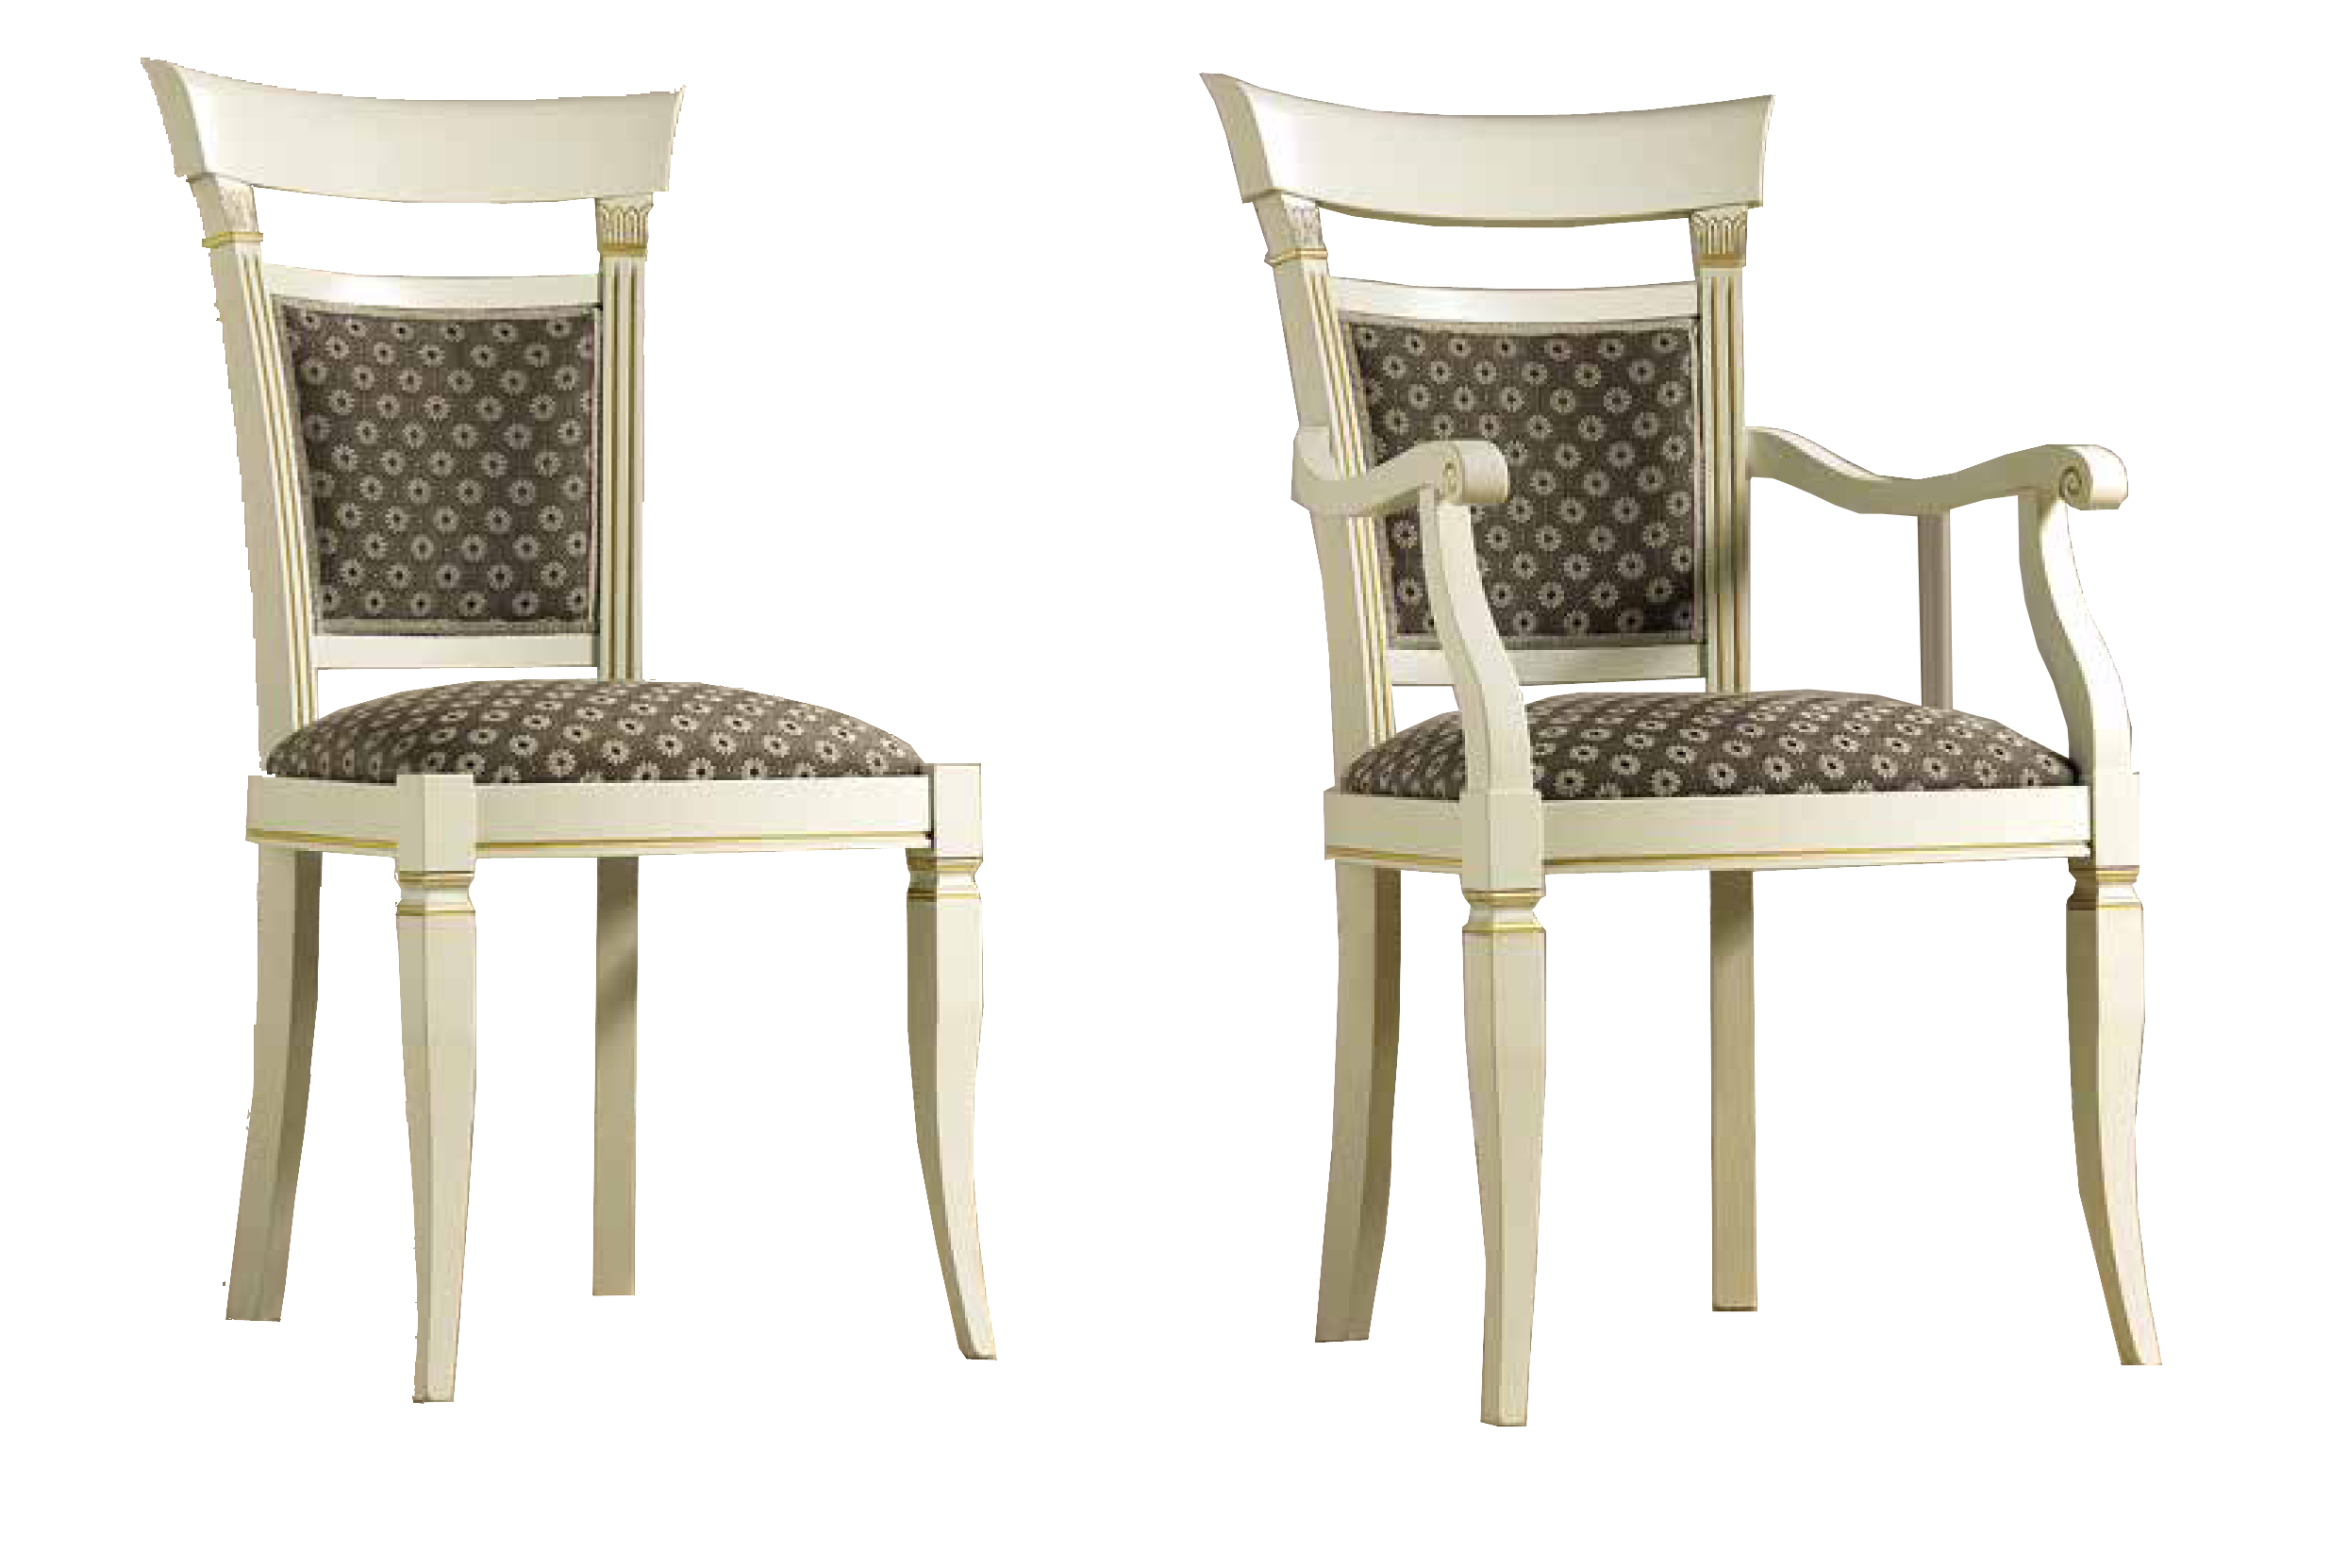 Brands Garcia Laurel & Hardy Tables Treviso Chairs White Ash